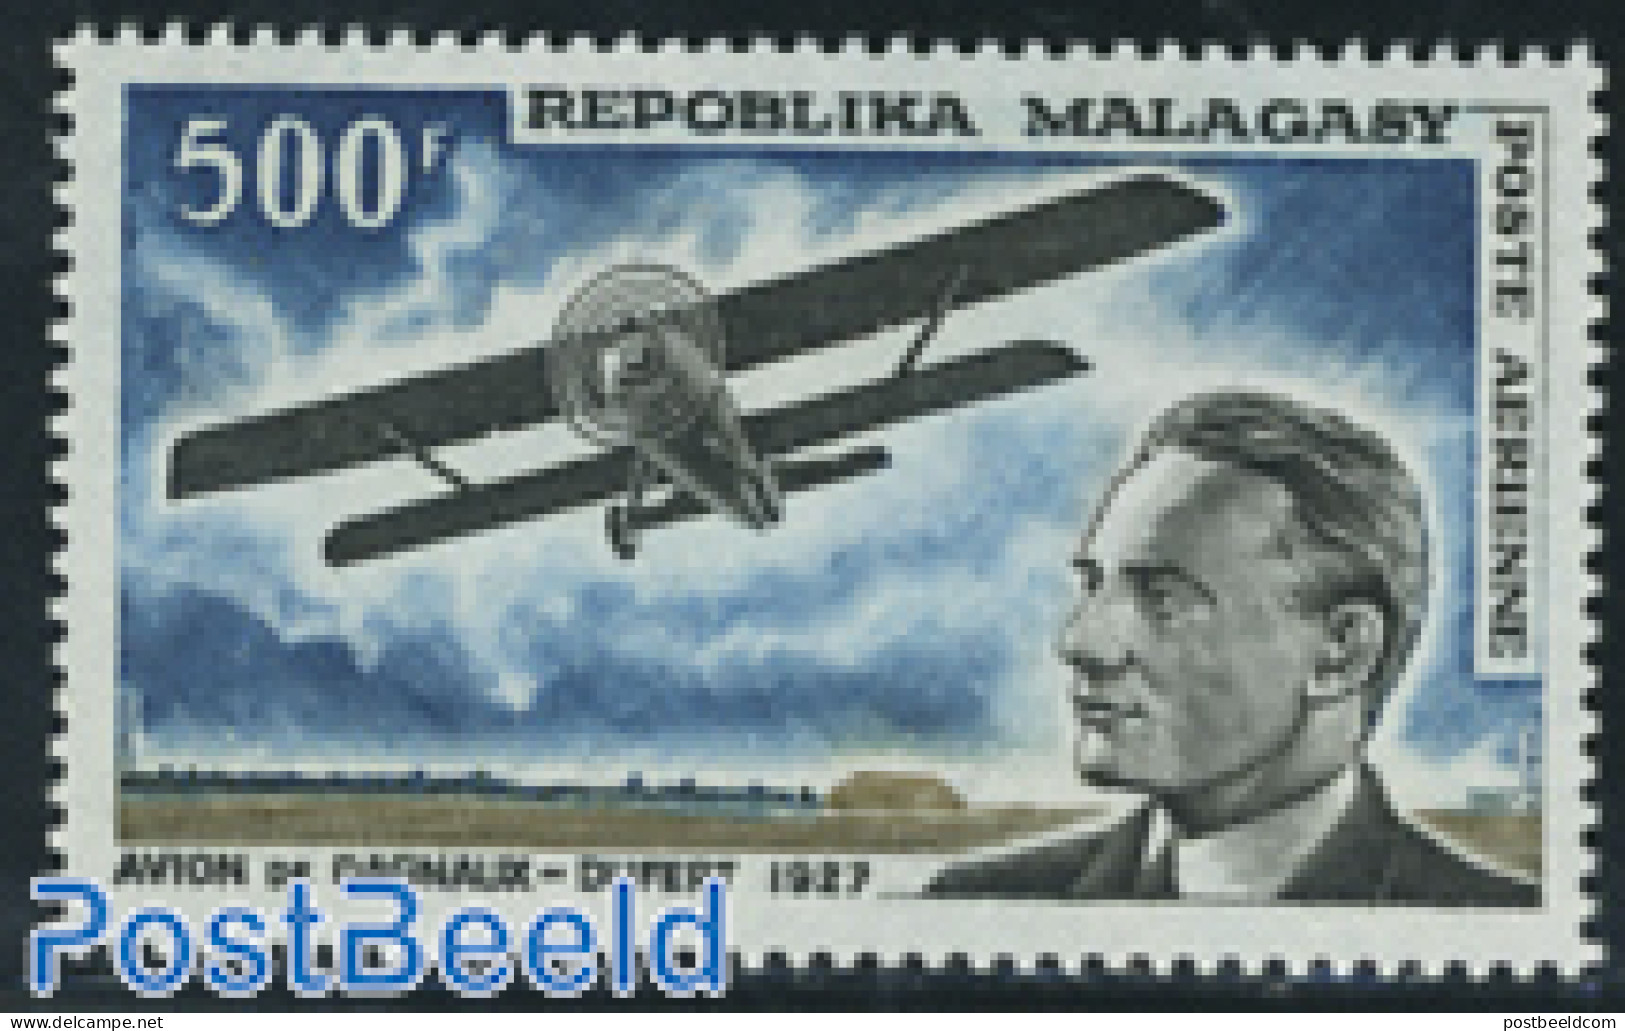 Madagascar 1967 500F, Stamp Out Of Set, Mint NH, Transport - Aircraft & Aviation - Aviones